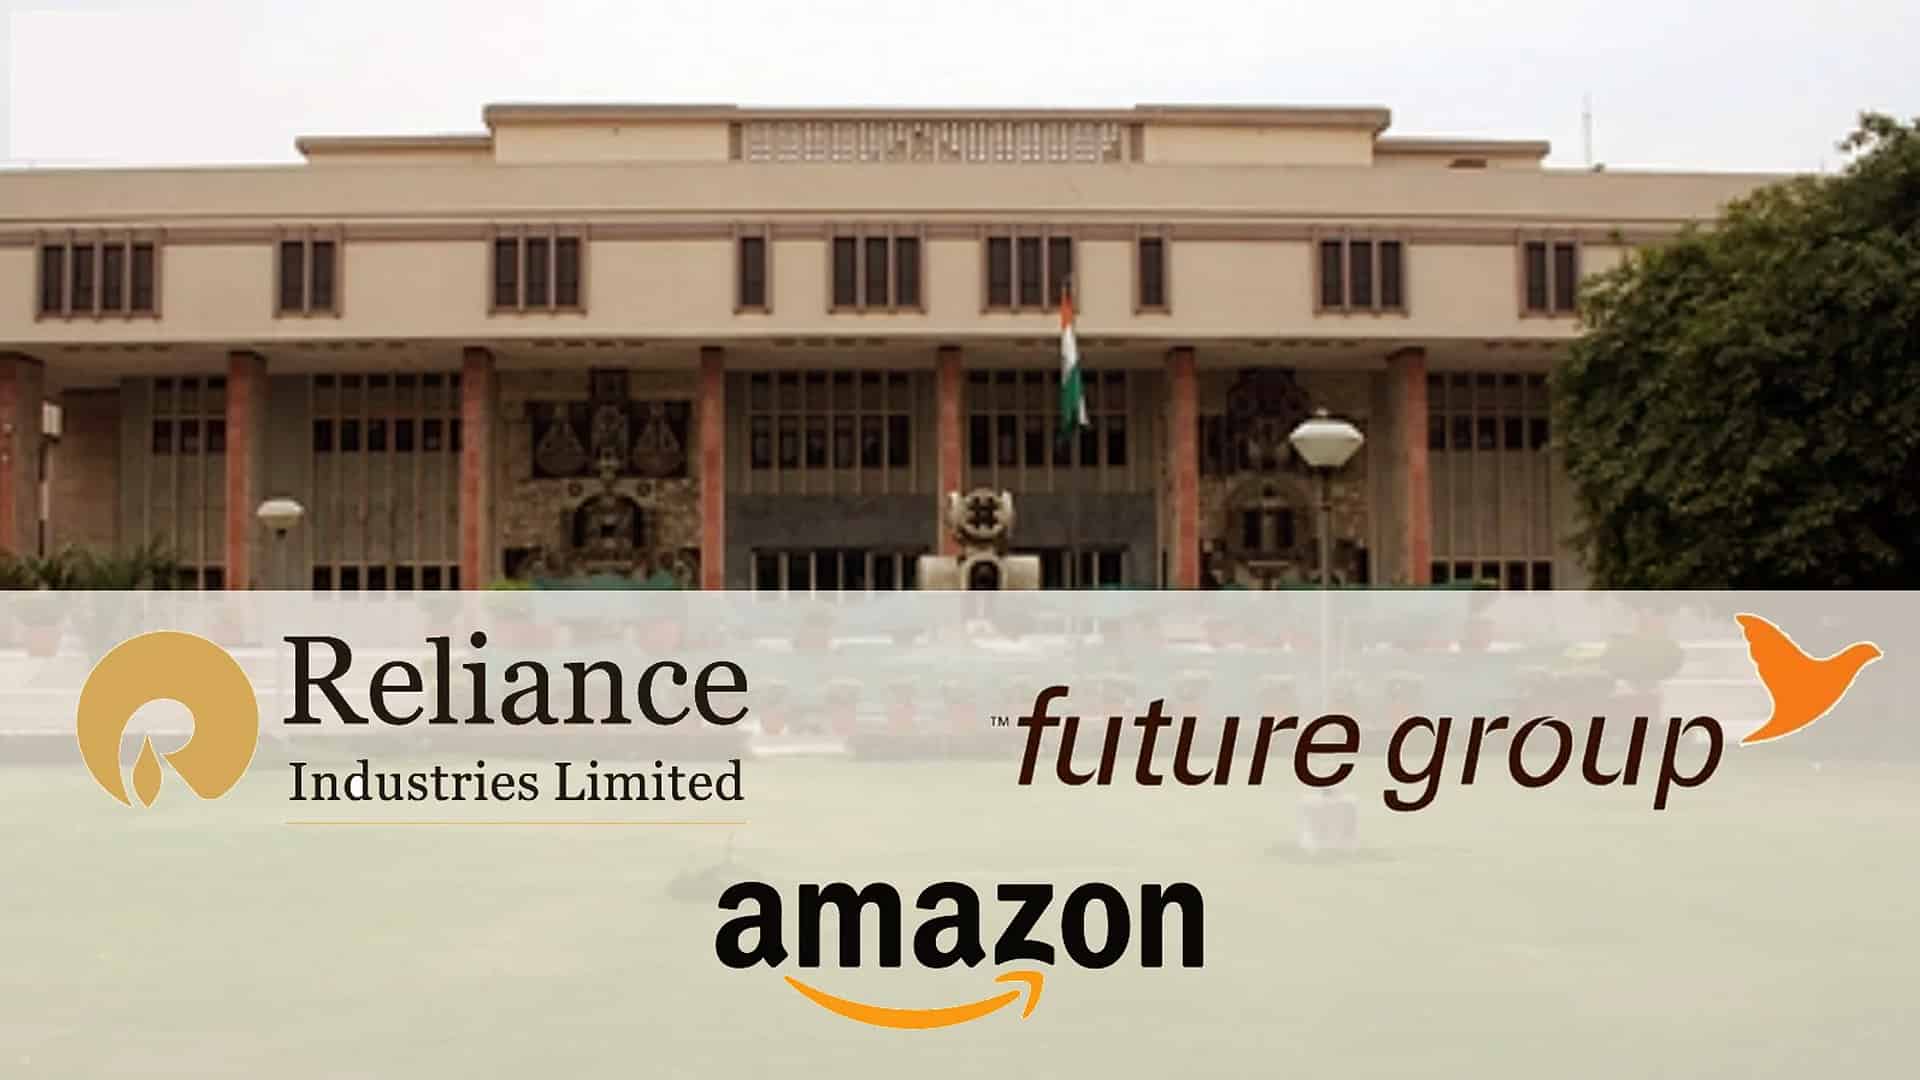 Future-Reliance deal: Delhi HC rejects FRL plea for stay against arbitration order, seeks Amazon's response